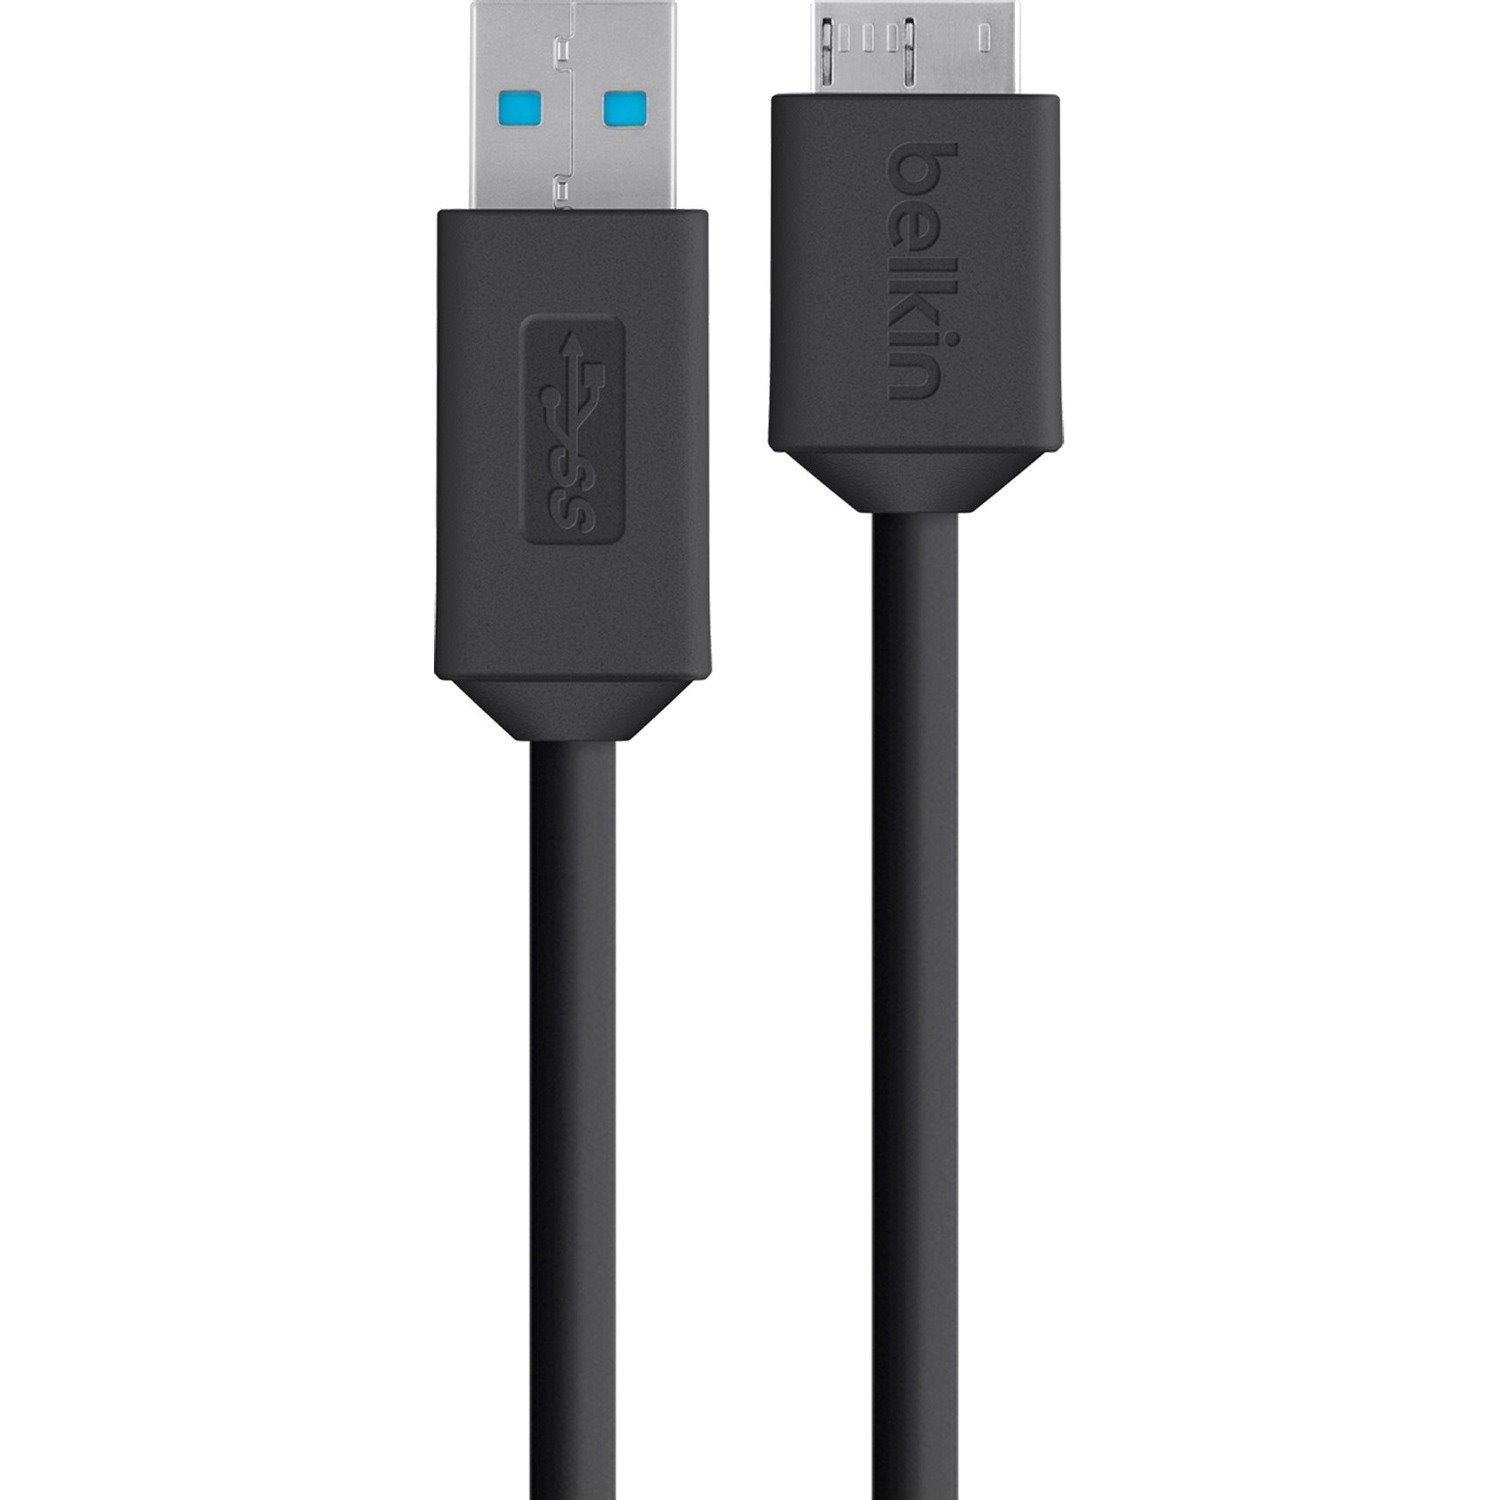 Belkin Micro-B to USB 3.0 Cable